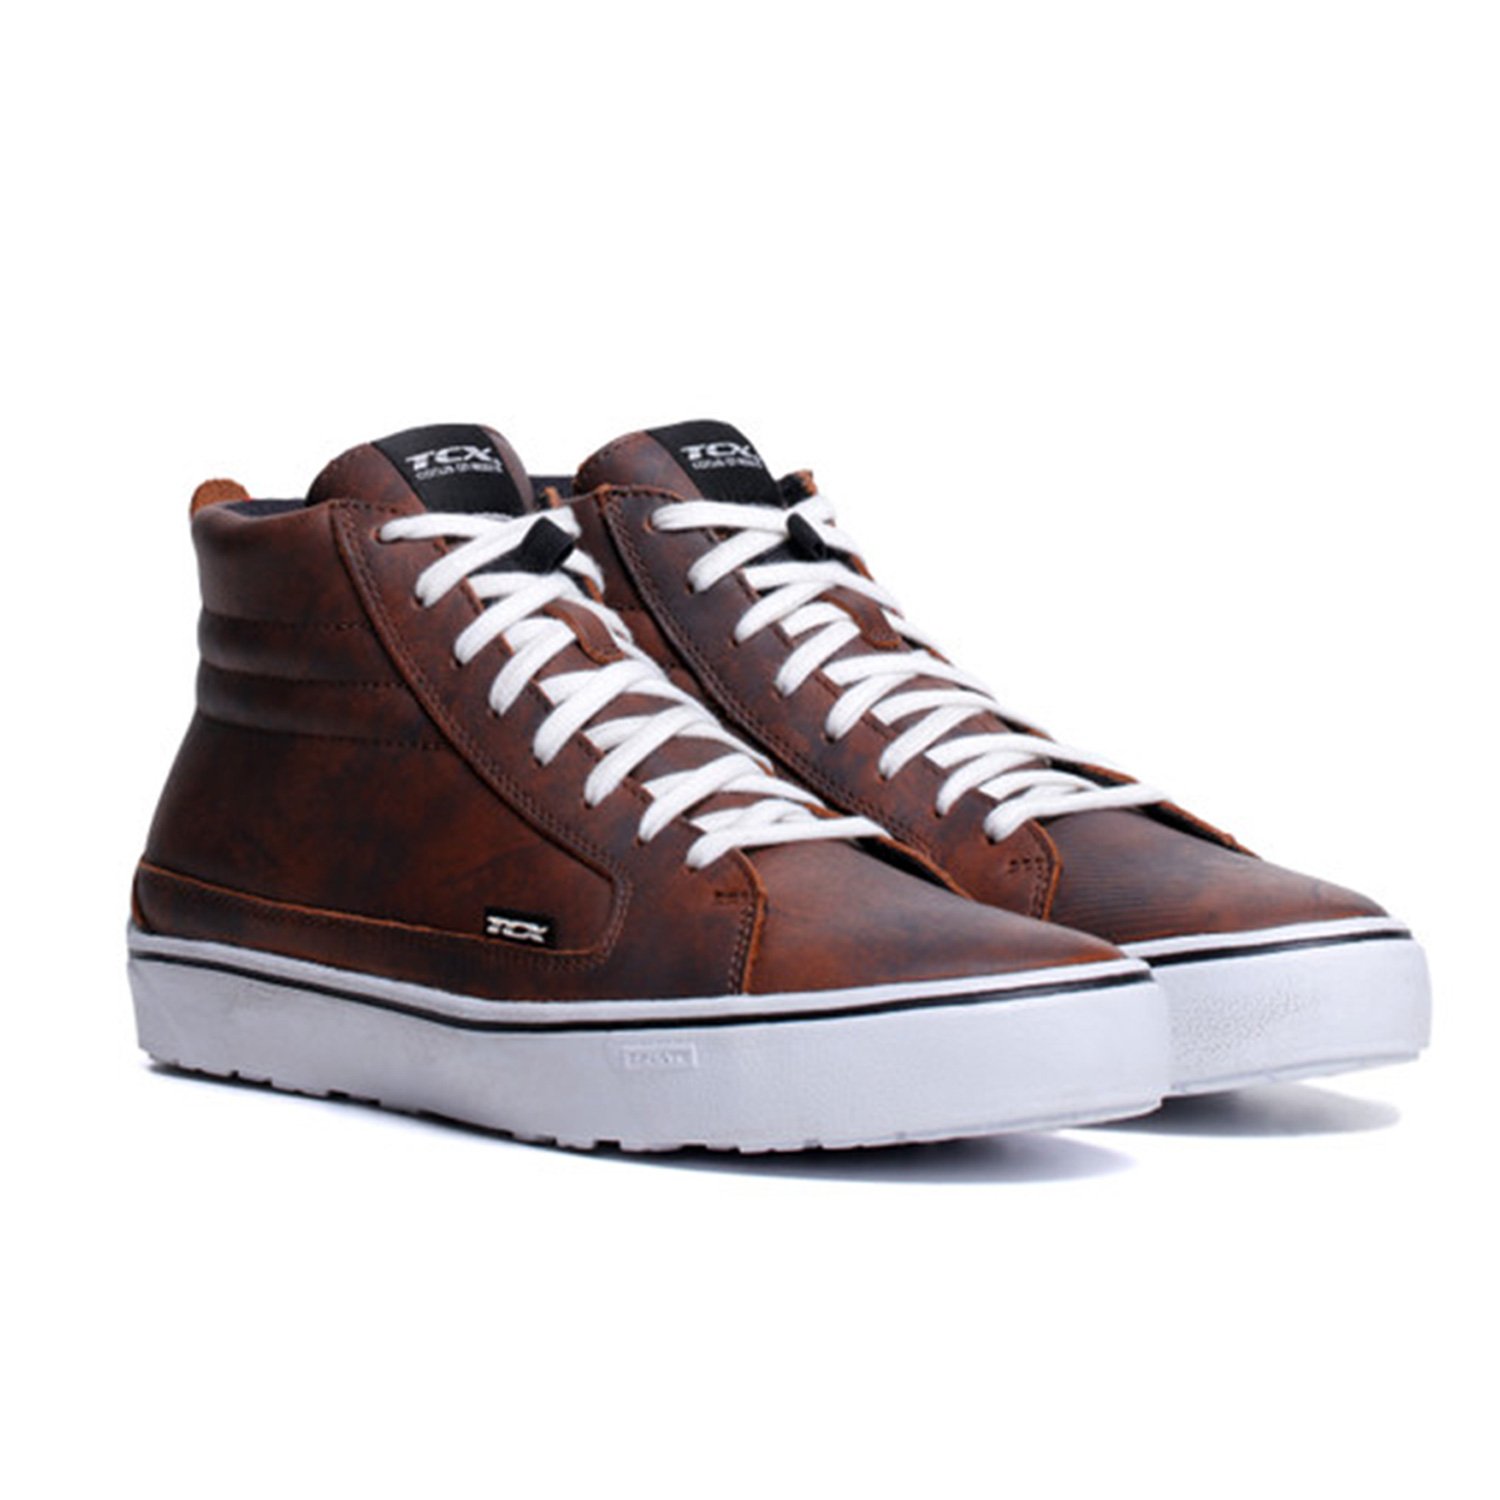 Image of EU TCX Street 3 WP Marron Blanc Chaussures Taille 47